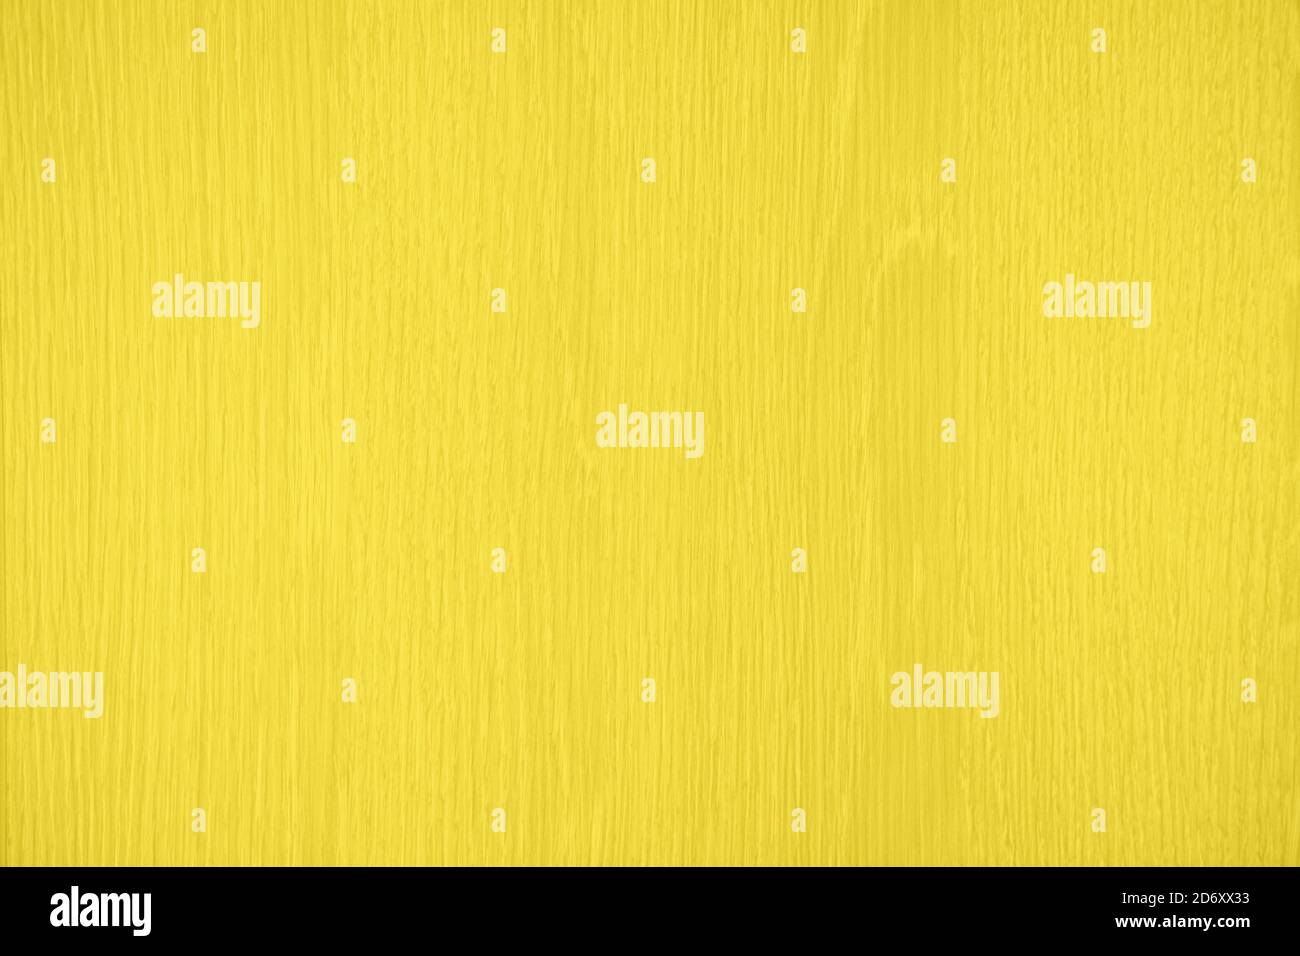 close up of yellow colored wood texture background Stock Photo